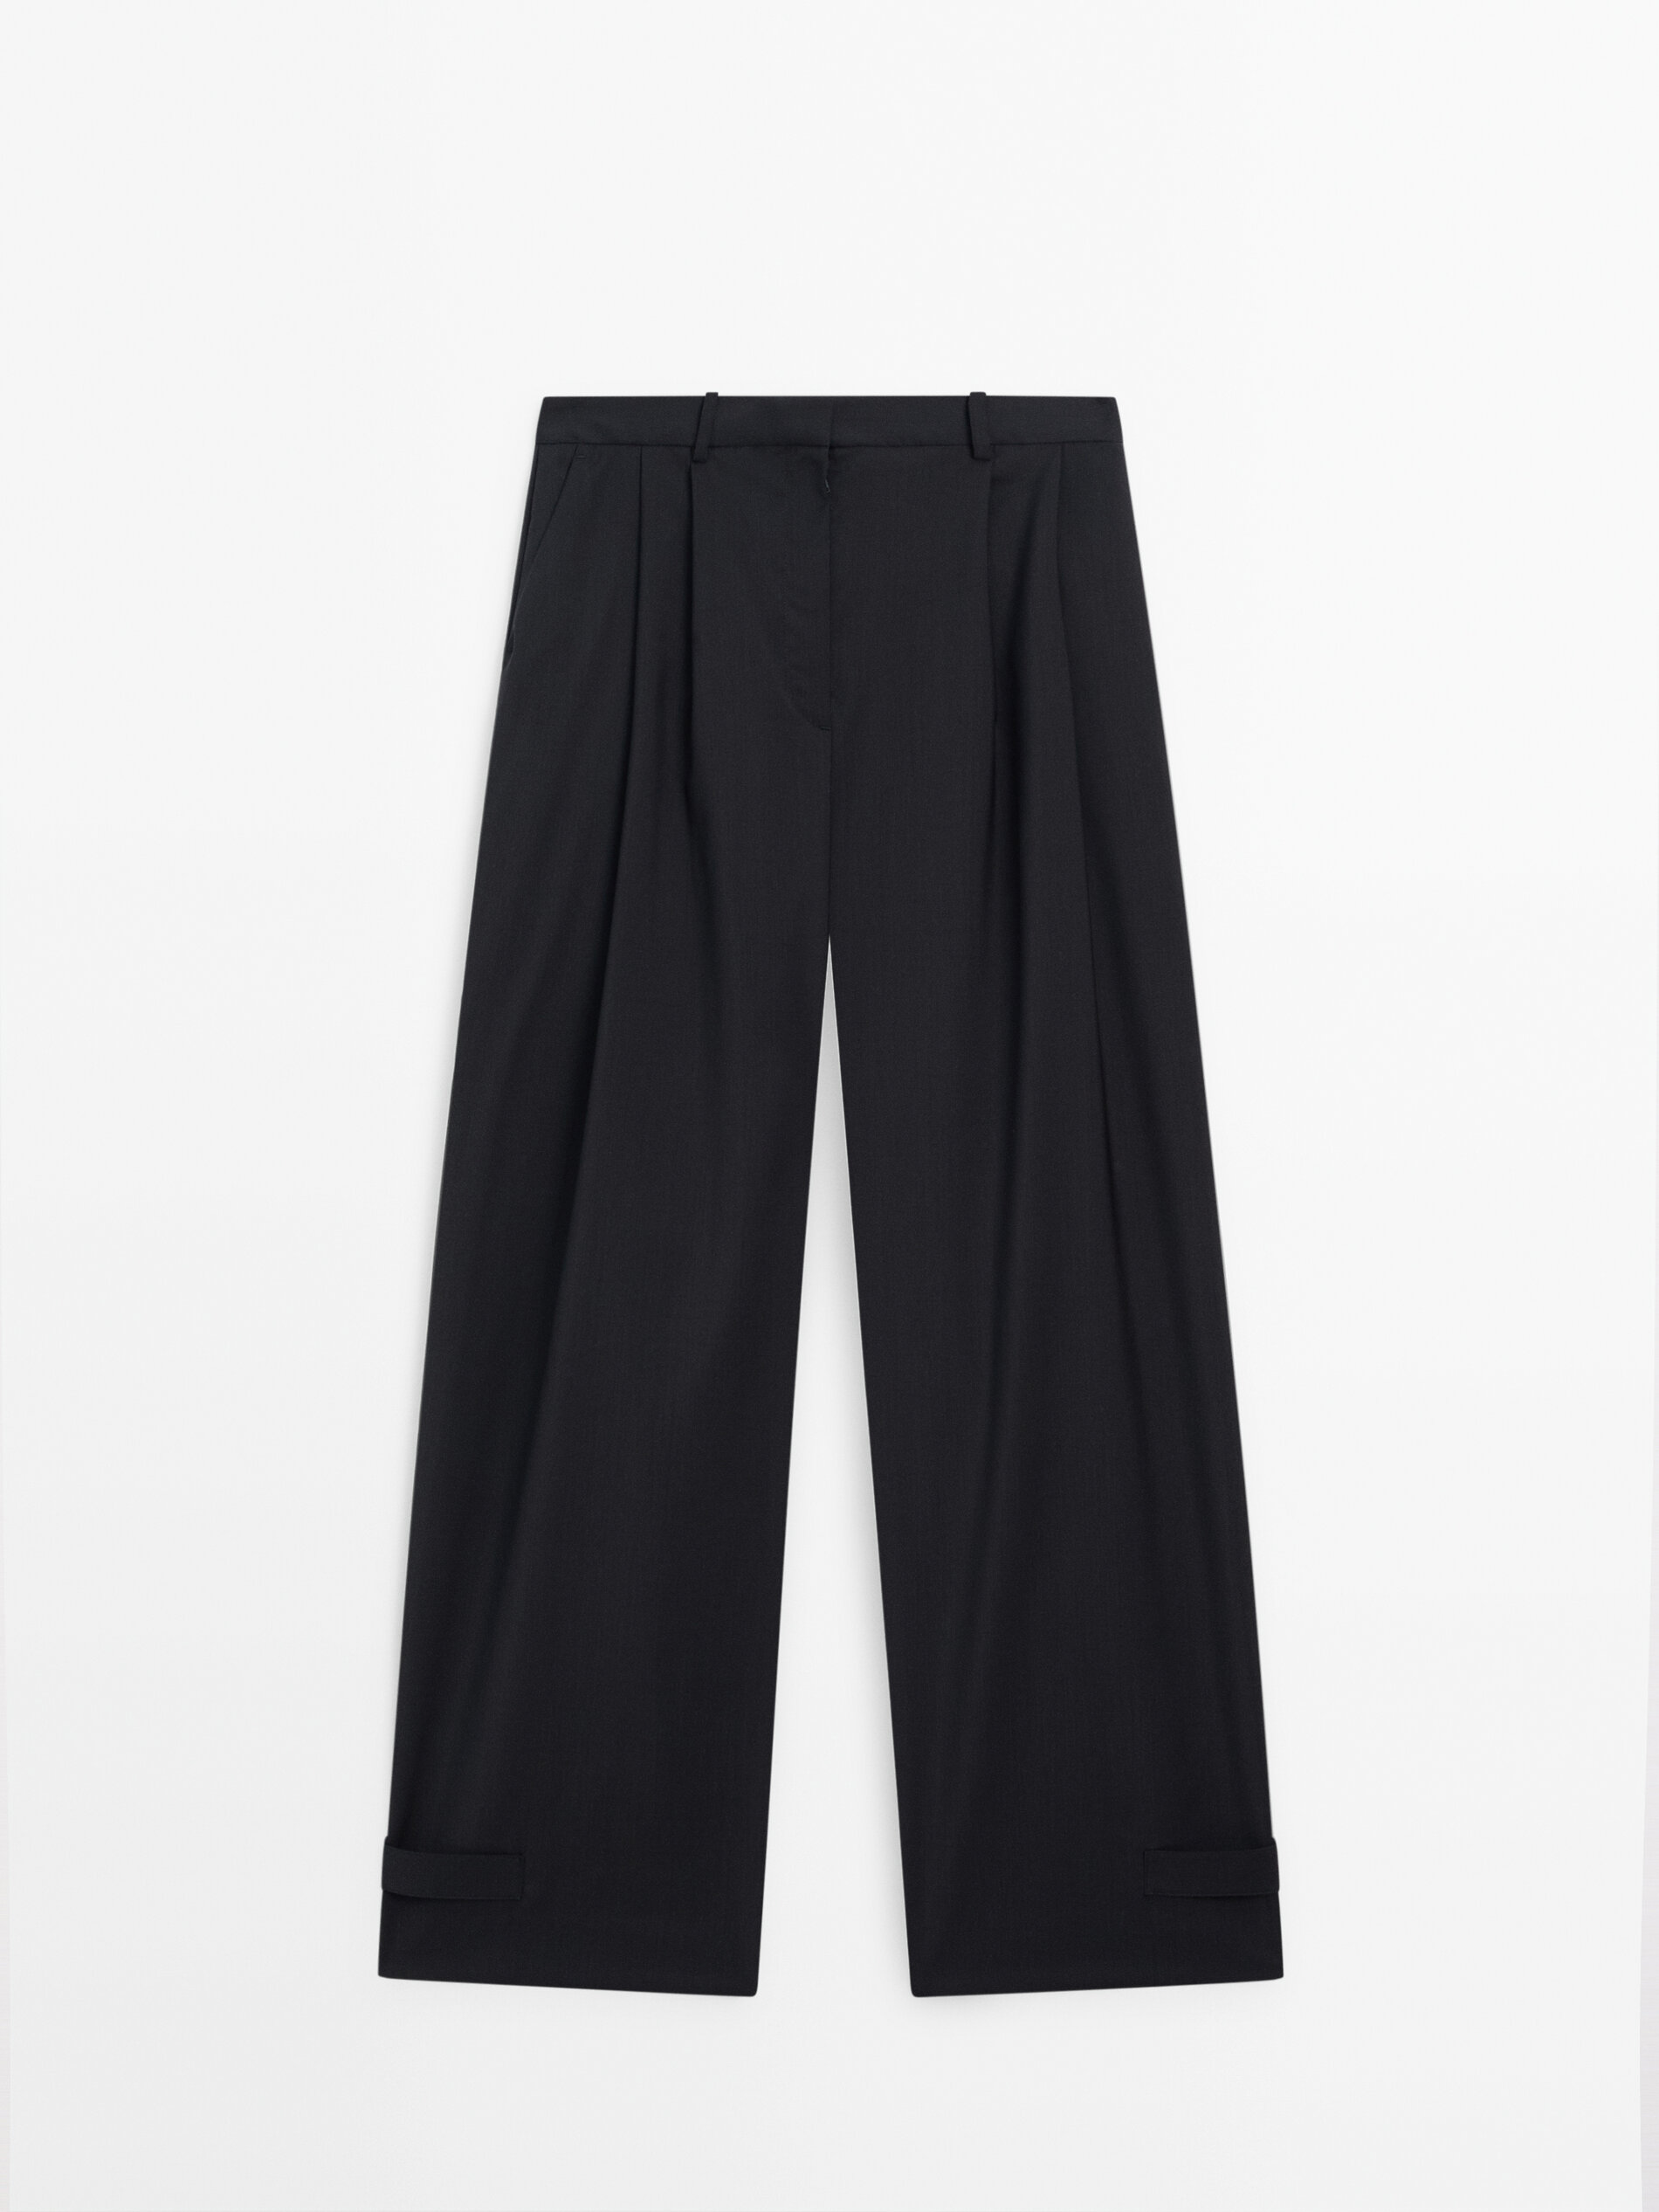 Trousers with adjustable bottom detail - Studio